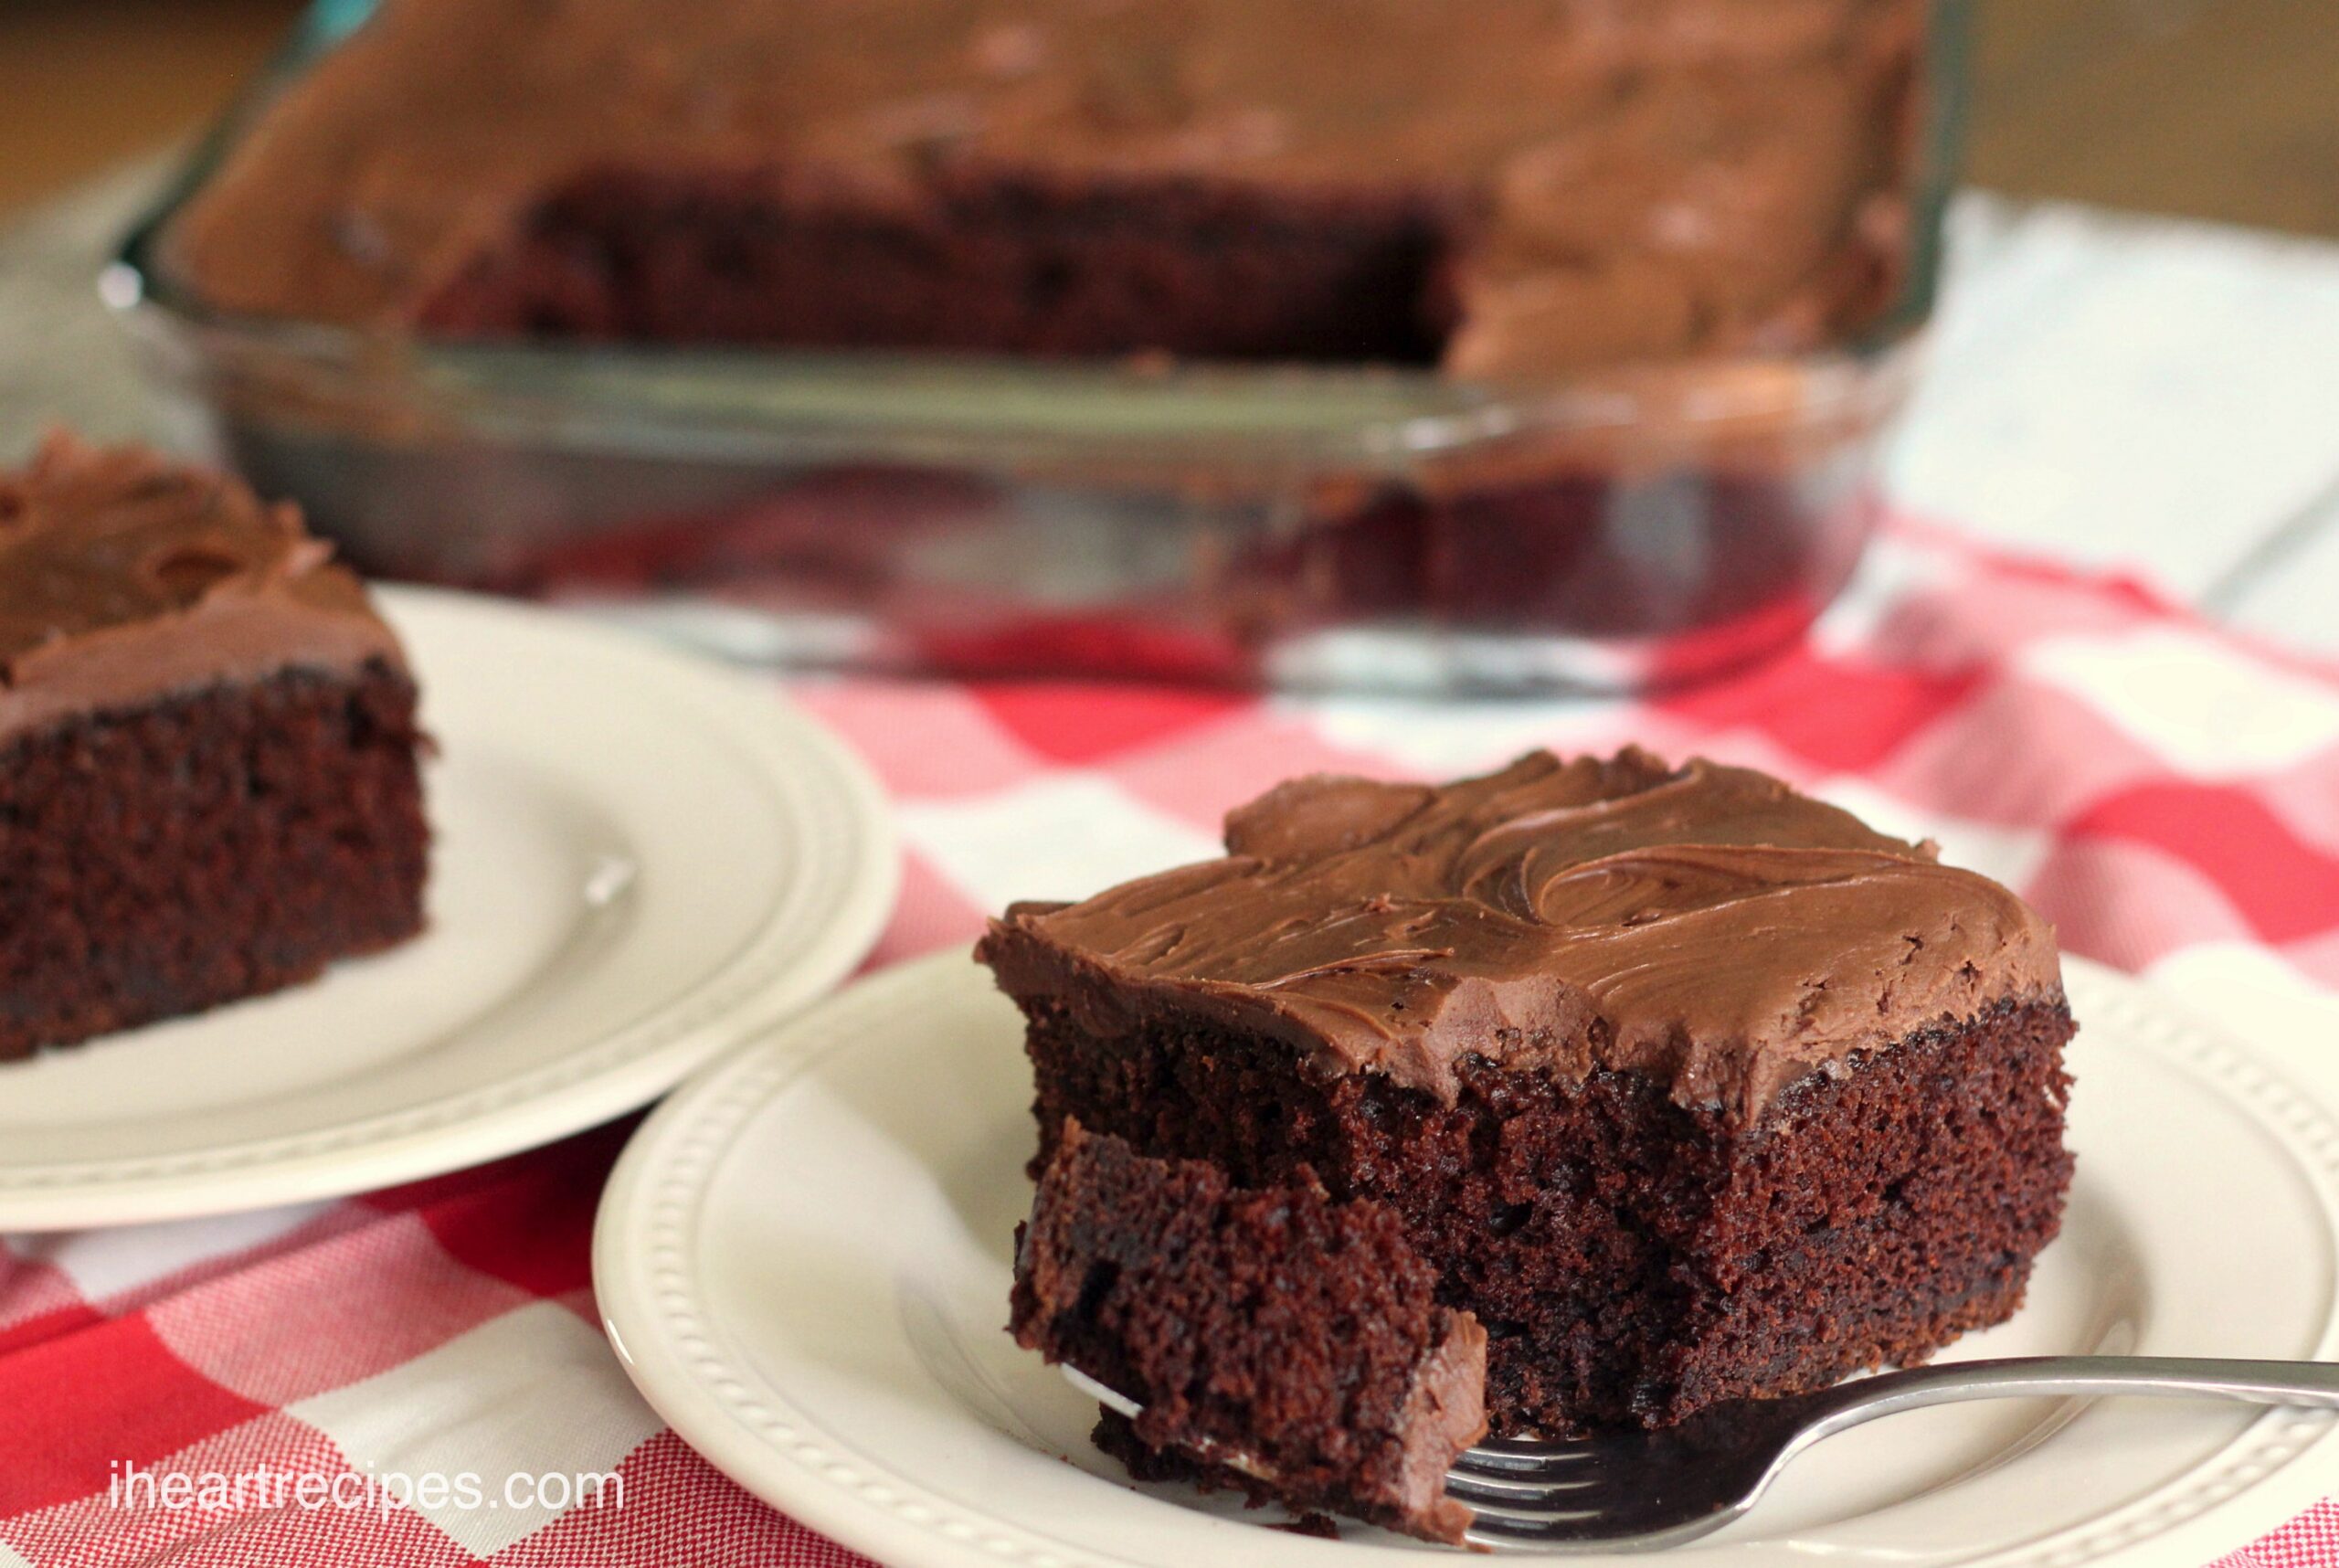 A slice of sour cream chocolate cake with a sweet chocolate frosting.